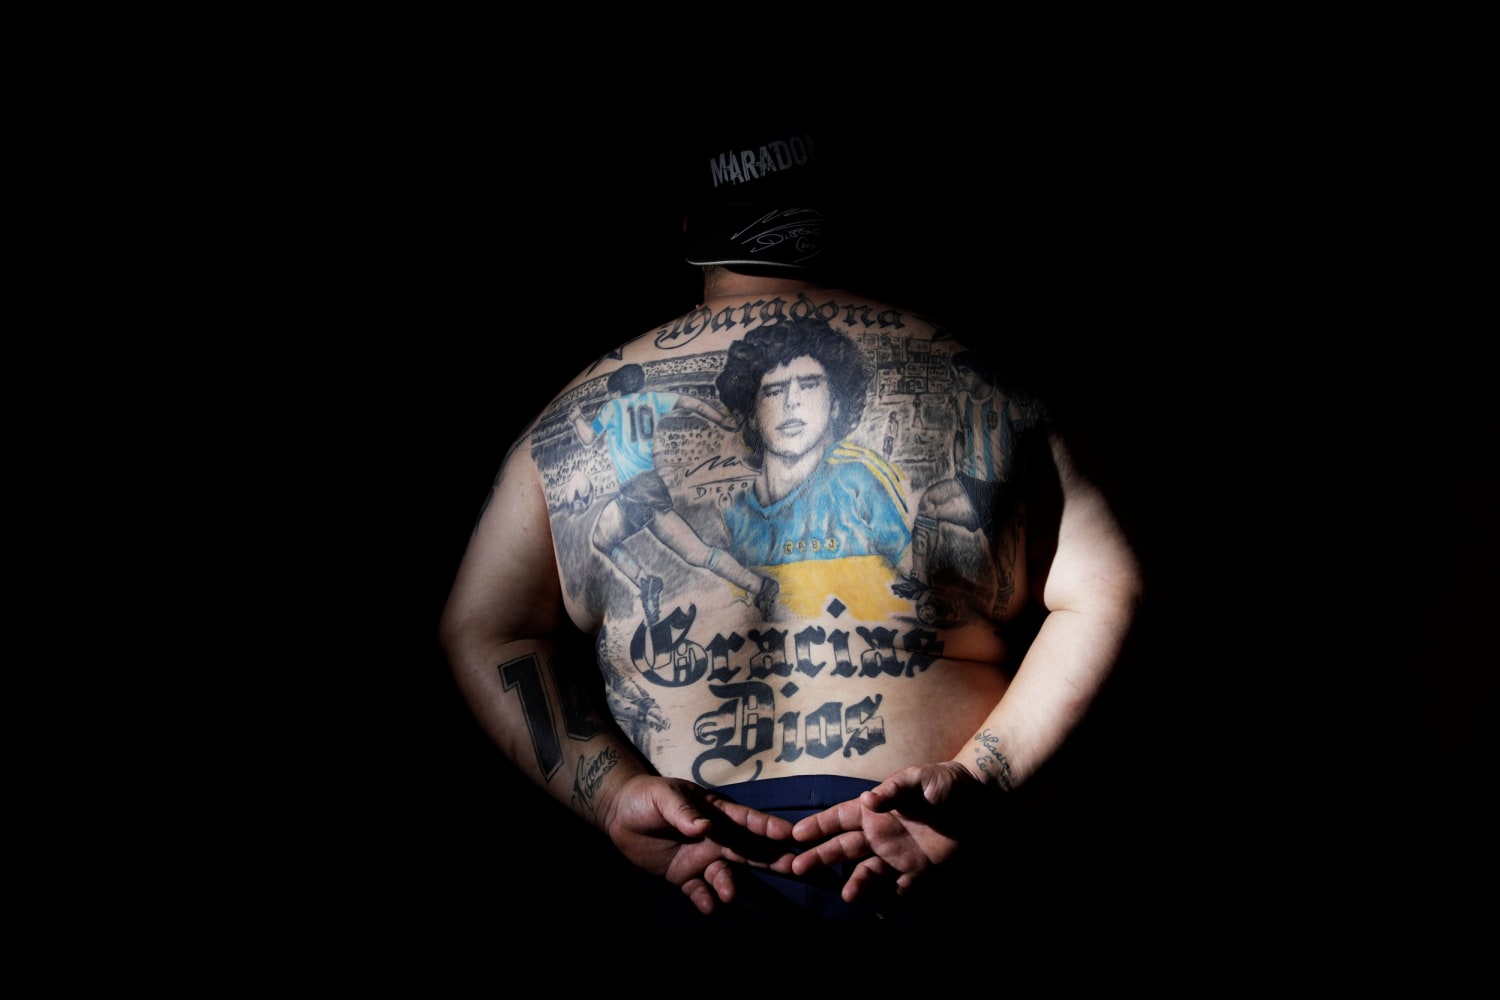 In Argentina, Maradona fans get tattoos to celebrate 'eternal love' for the soccer legend